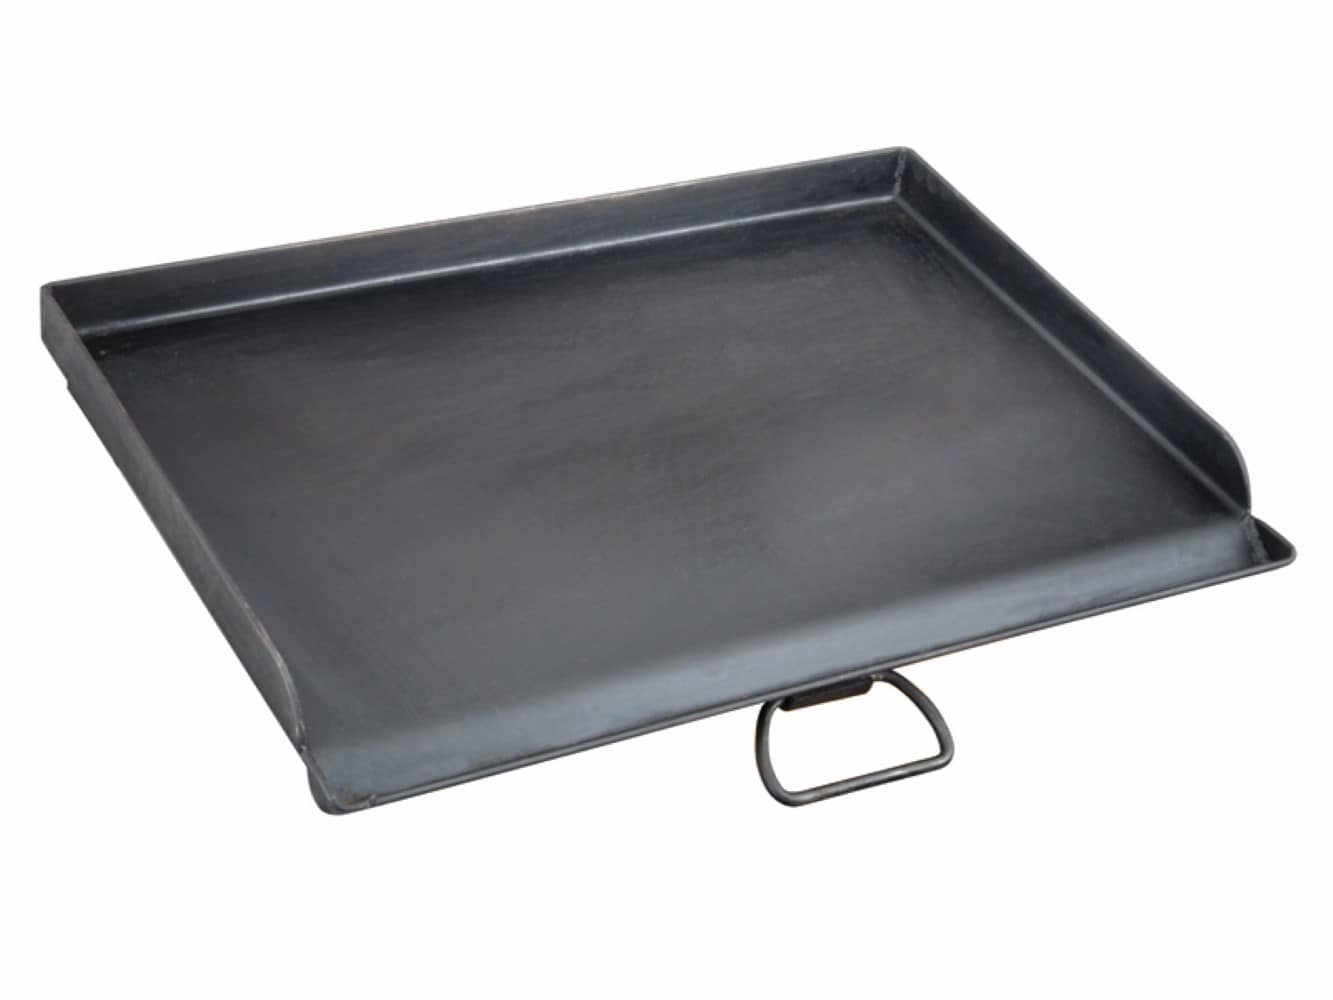 Camp Chef 14 x 16 Inch Professional Flat Top Griddle